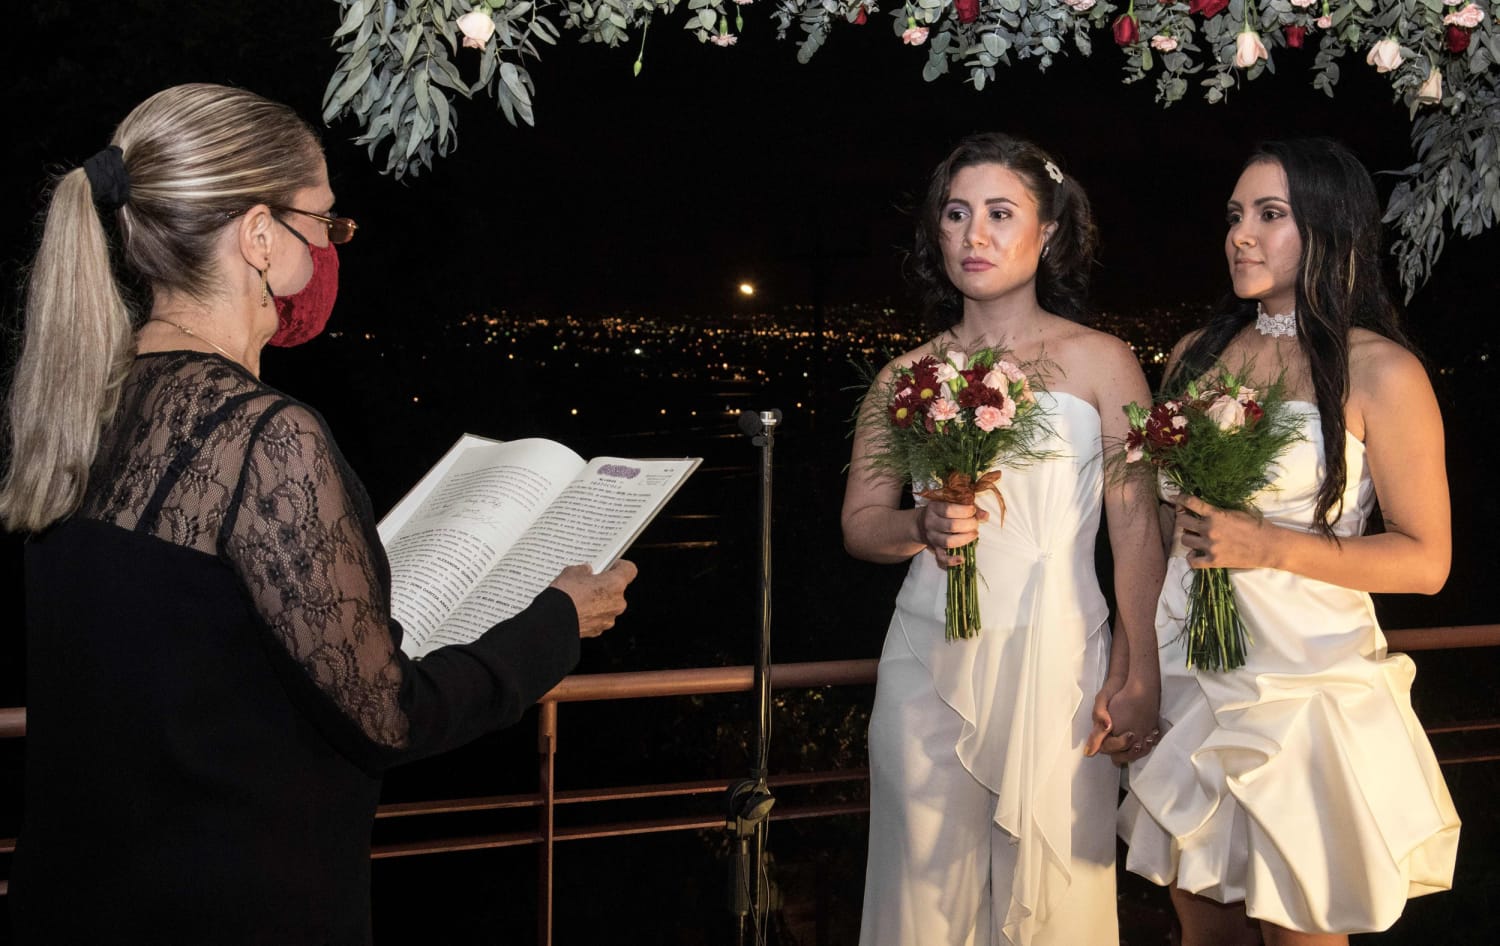 Lesbian couple become Costa Ricas first same-sex spouses